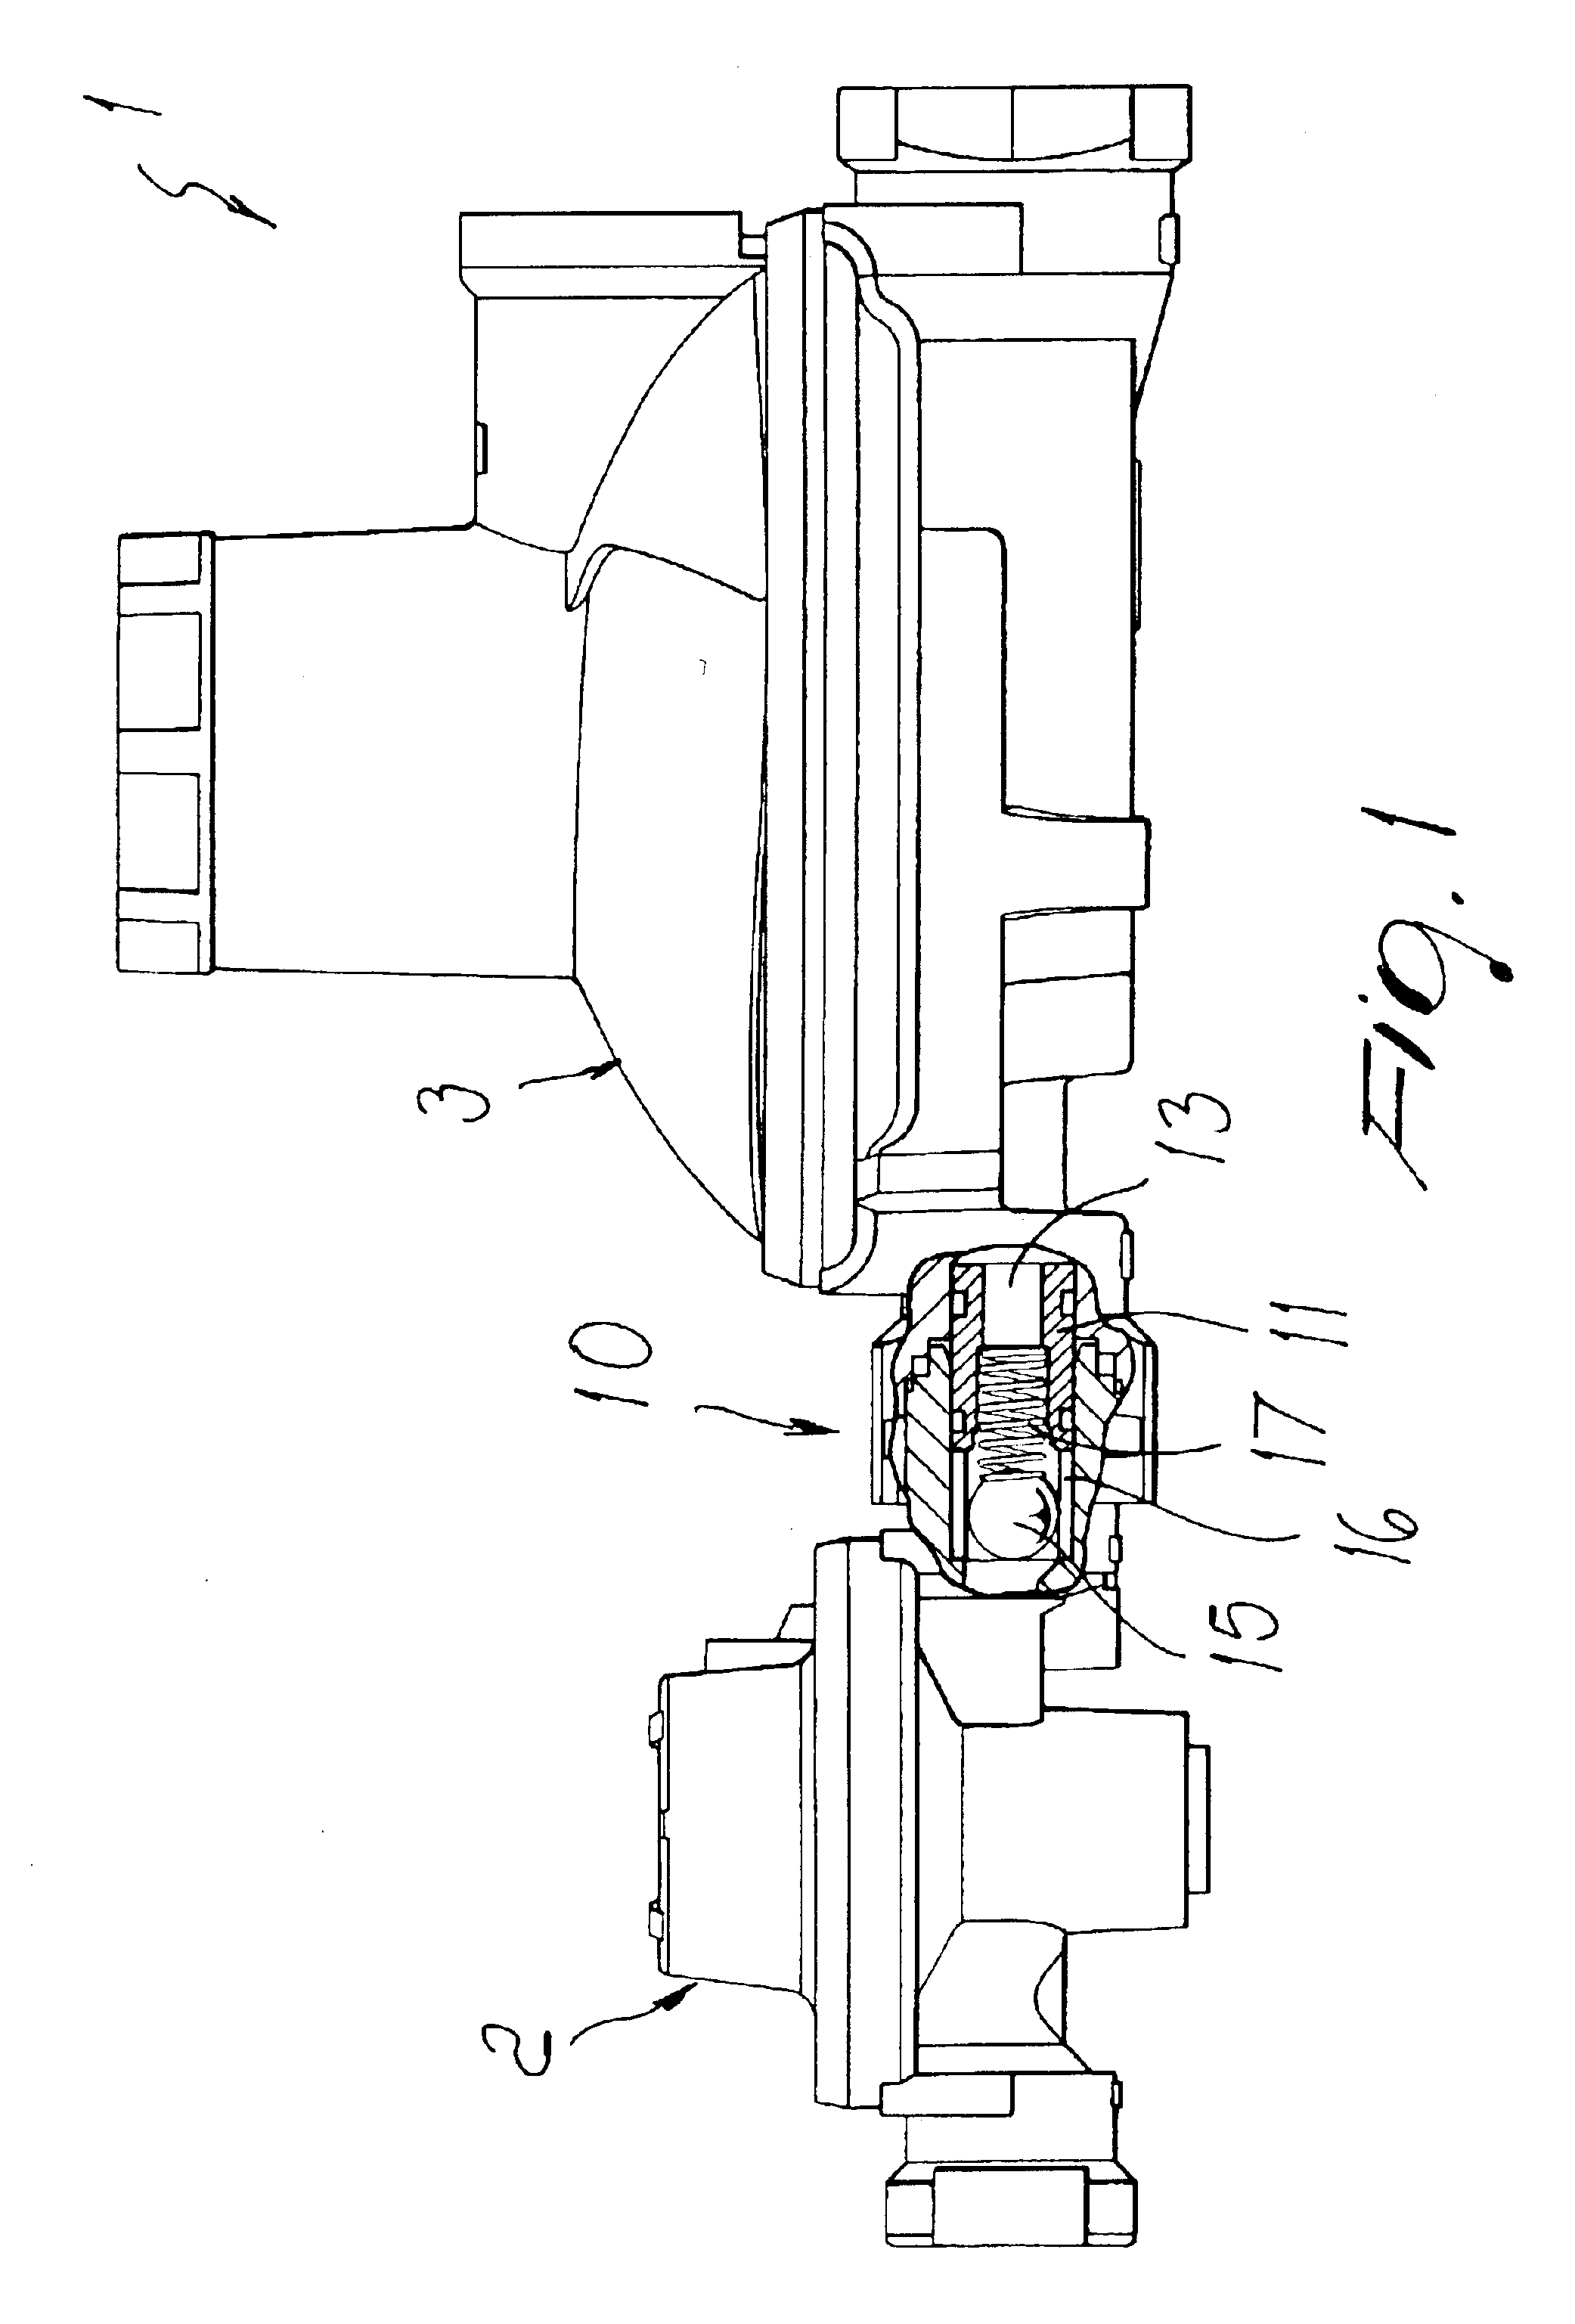 Device for regulating the flow of gas toward user equipment